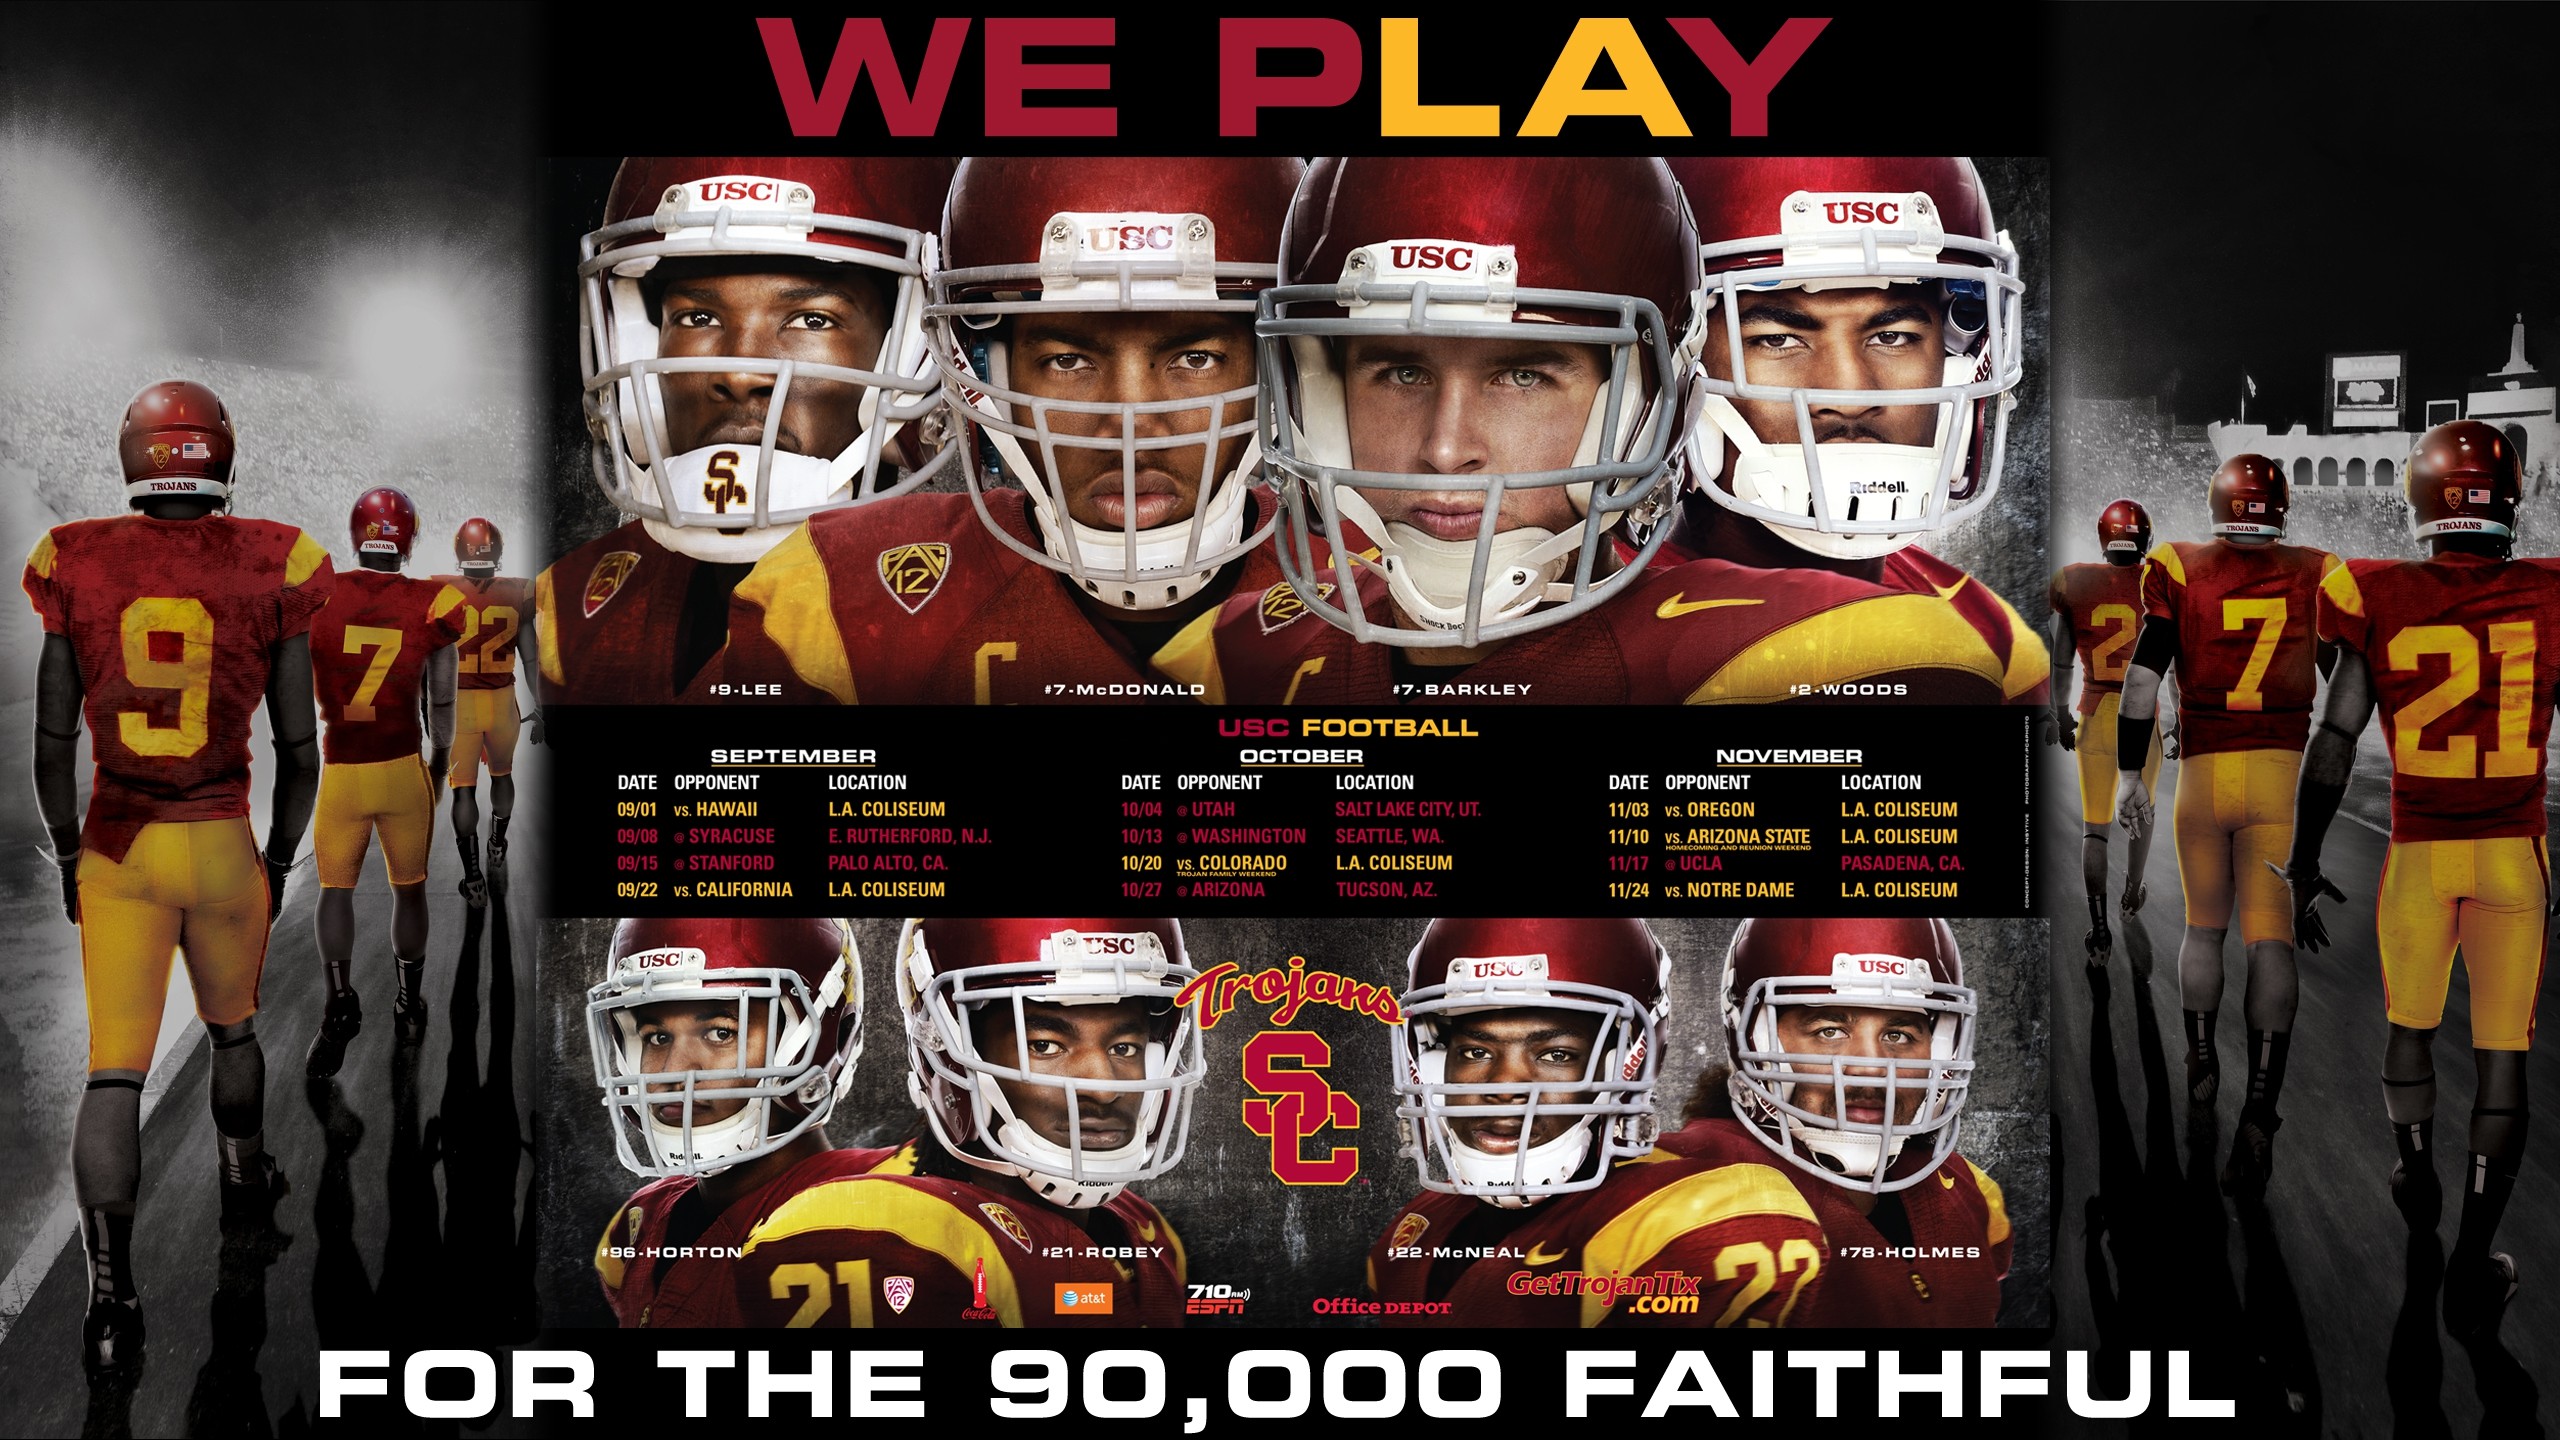 2560x1440 wallpaper.wiki-Usc-Football-Pictures-PIC-WPD007548